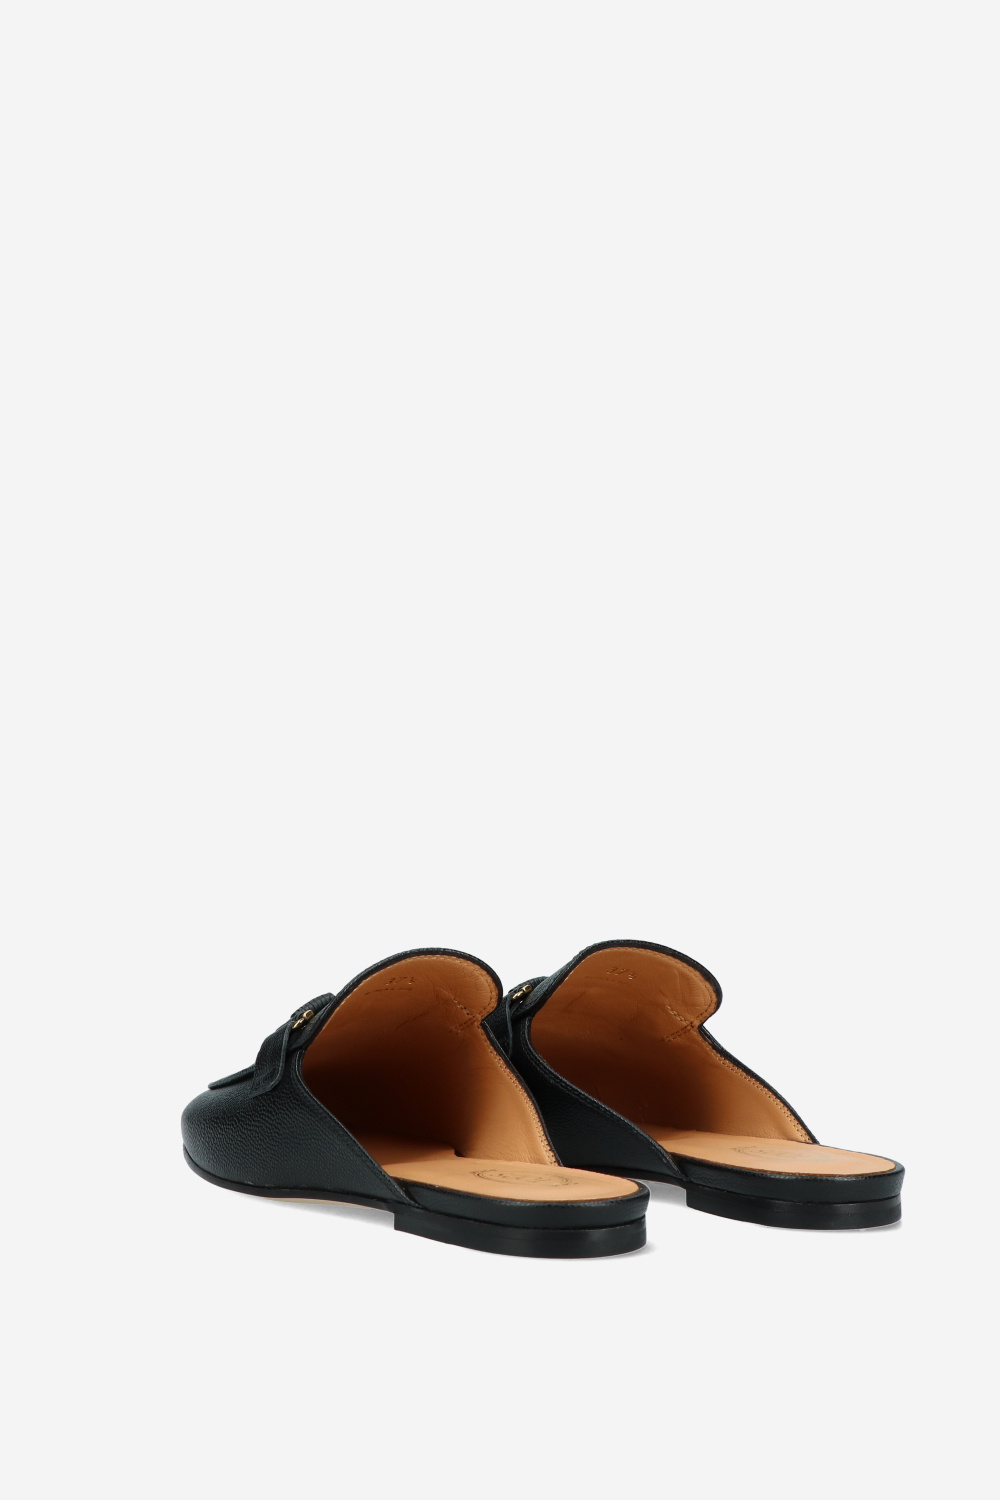 Tods Mules Black